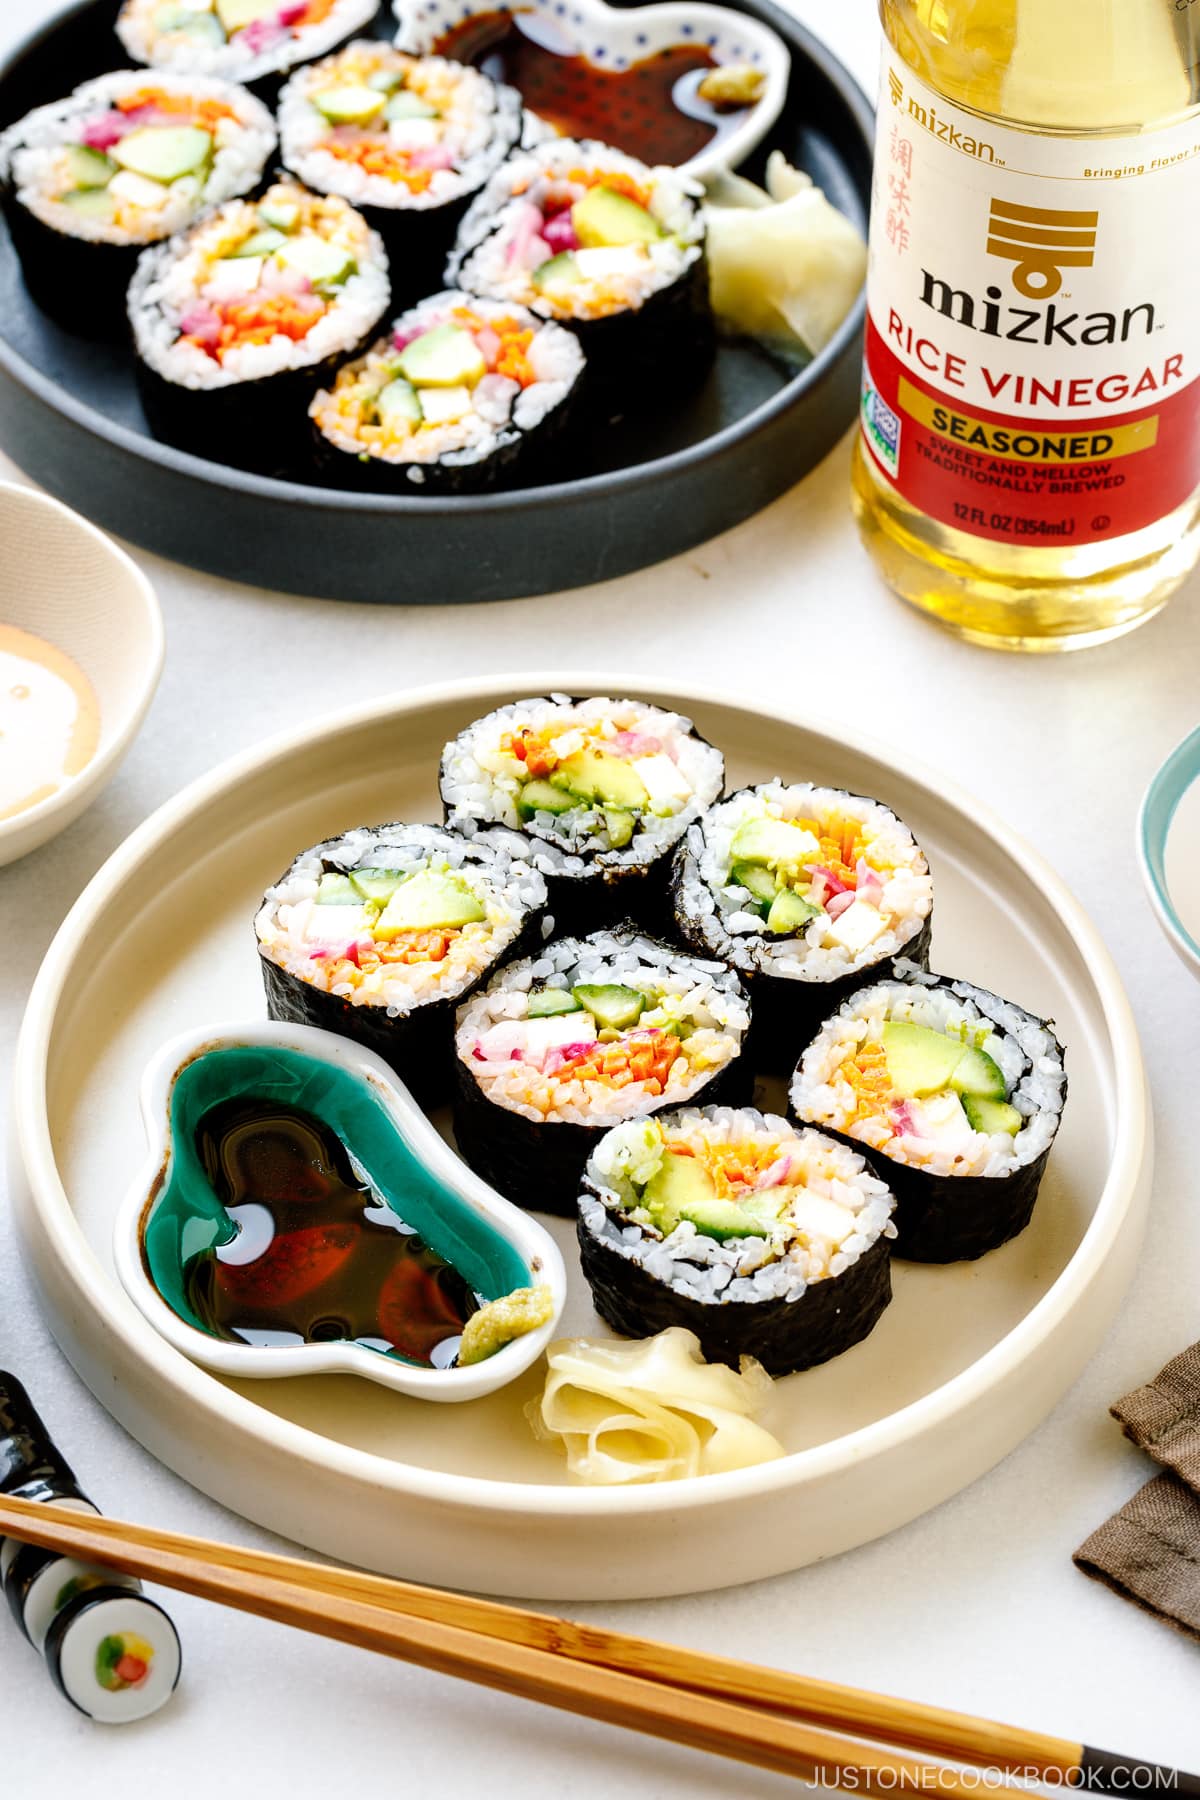 Black and white round plates containing colorful vegetarian sushi rolls.